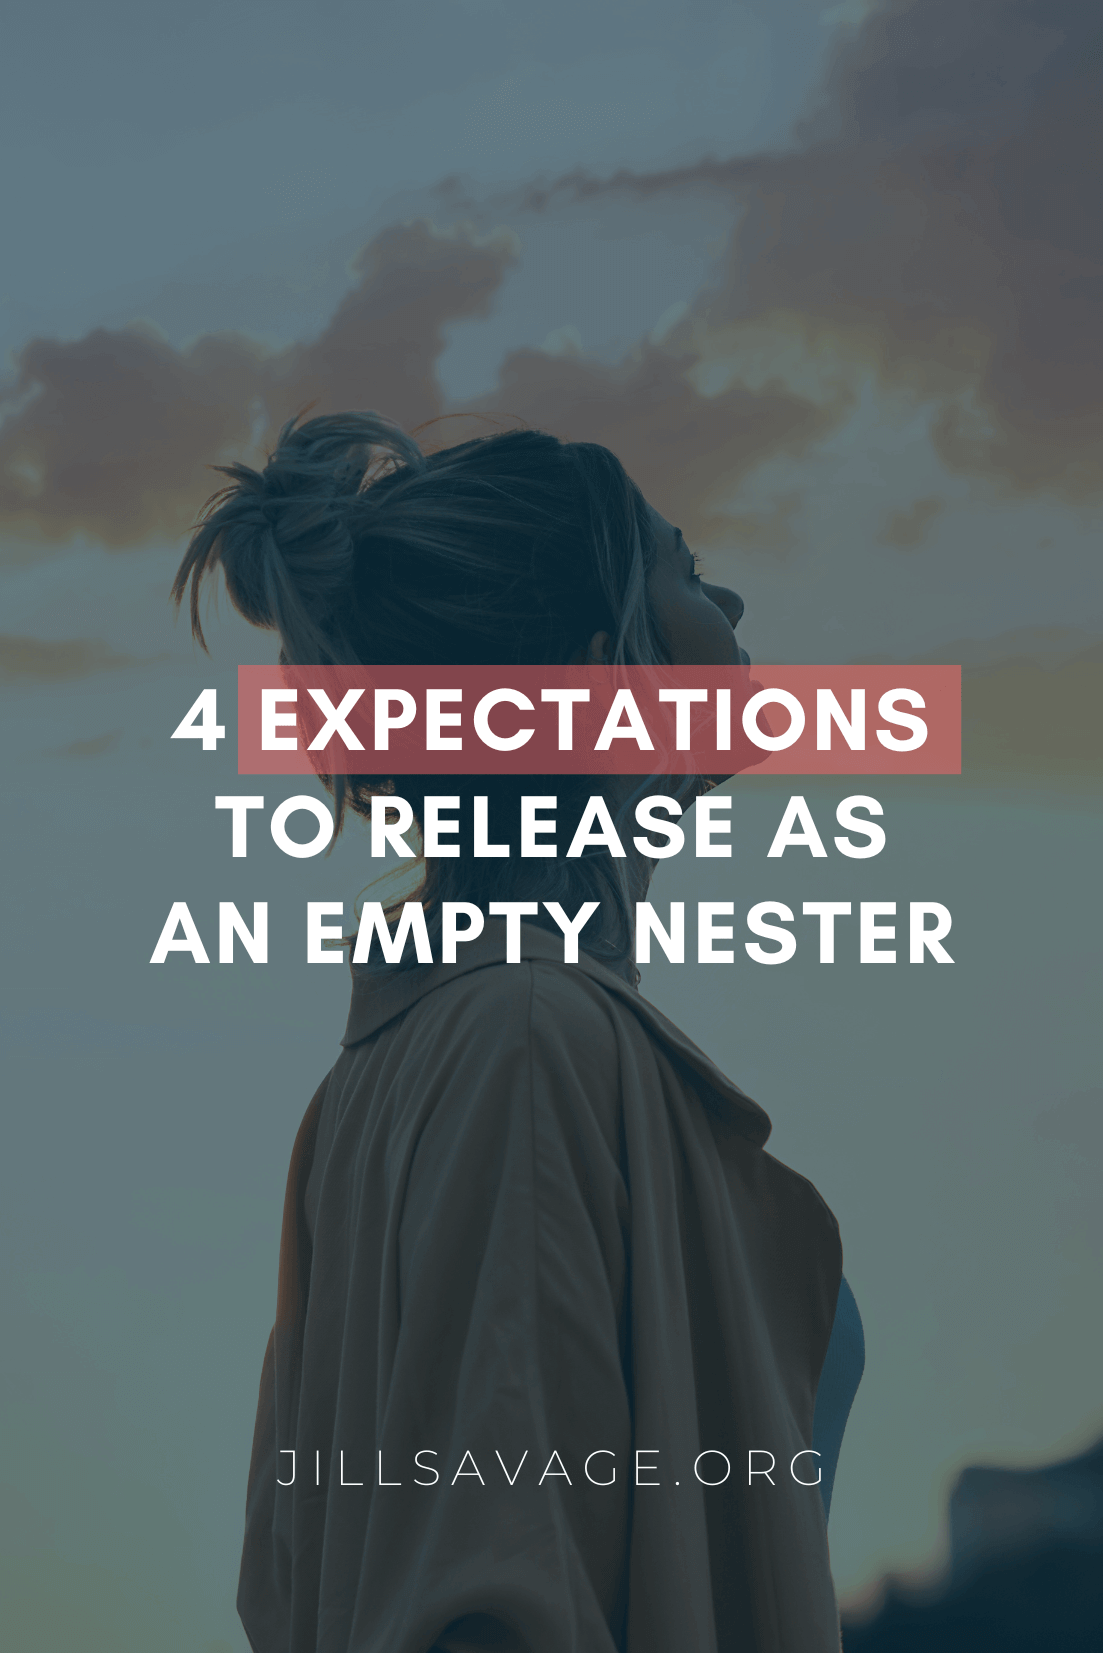 4 Expectations to Release as an Empty Nester